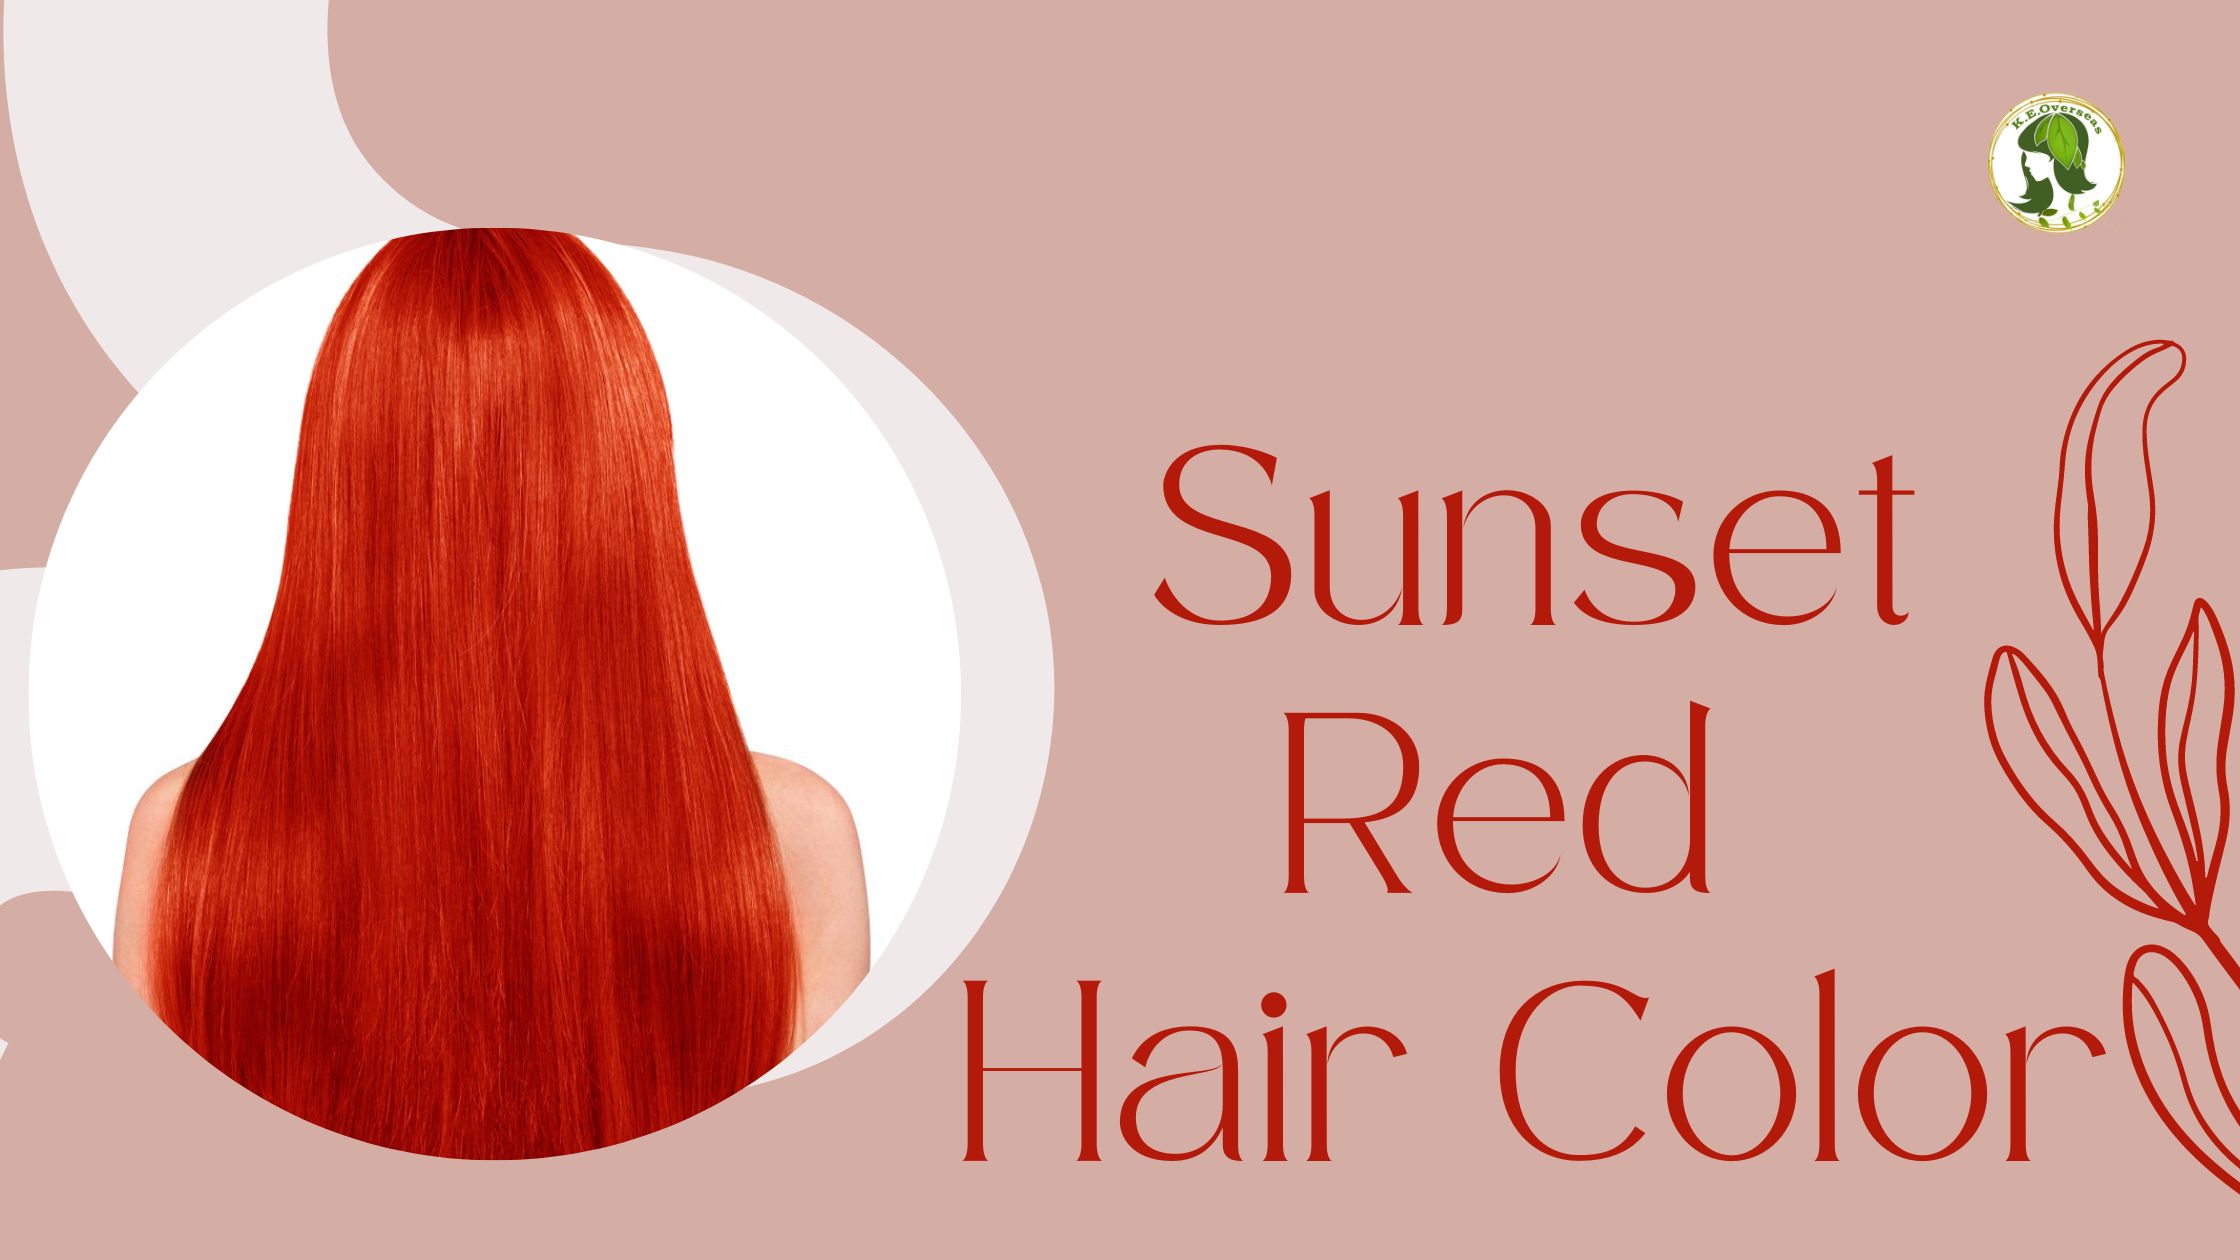 Sunset Red Hair Color